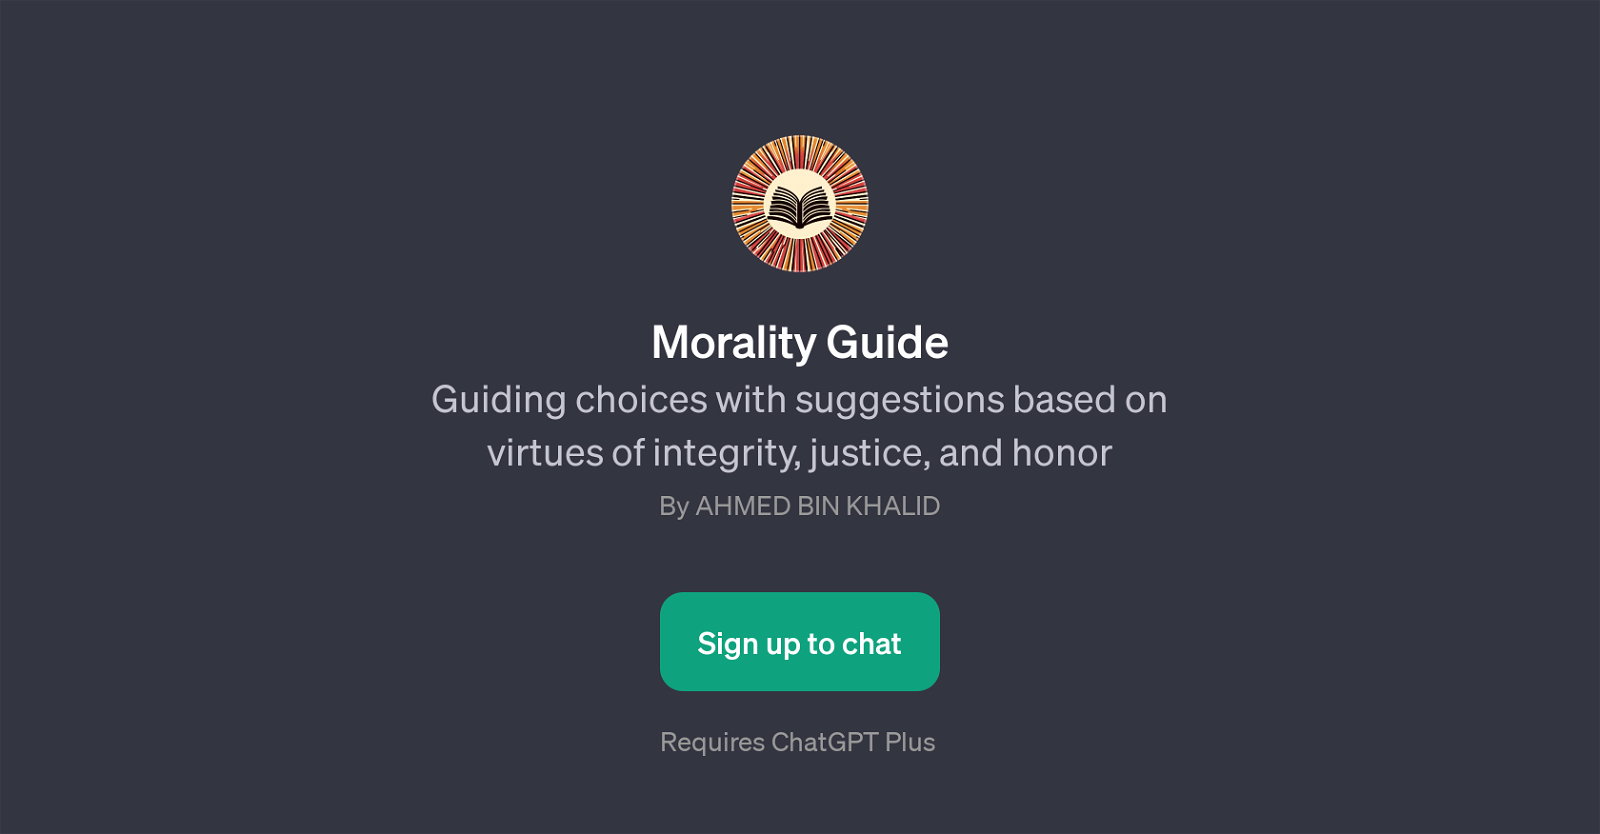 Morality Guide website